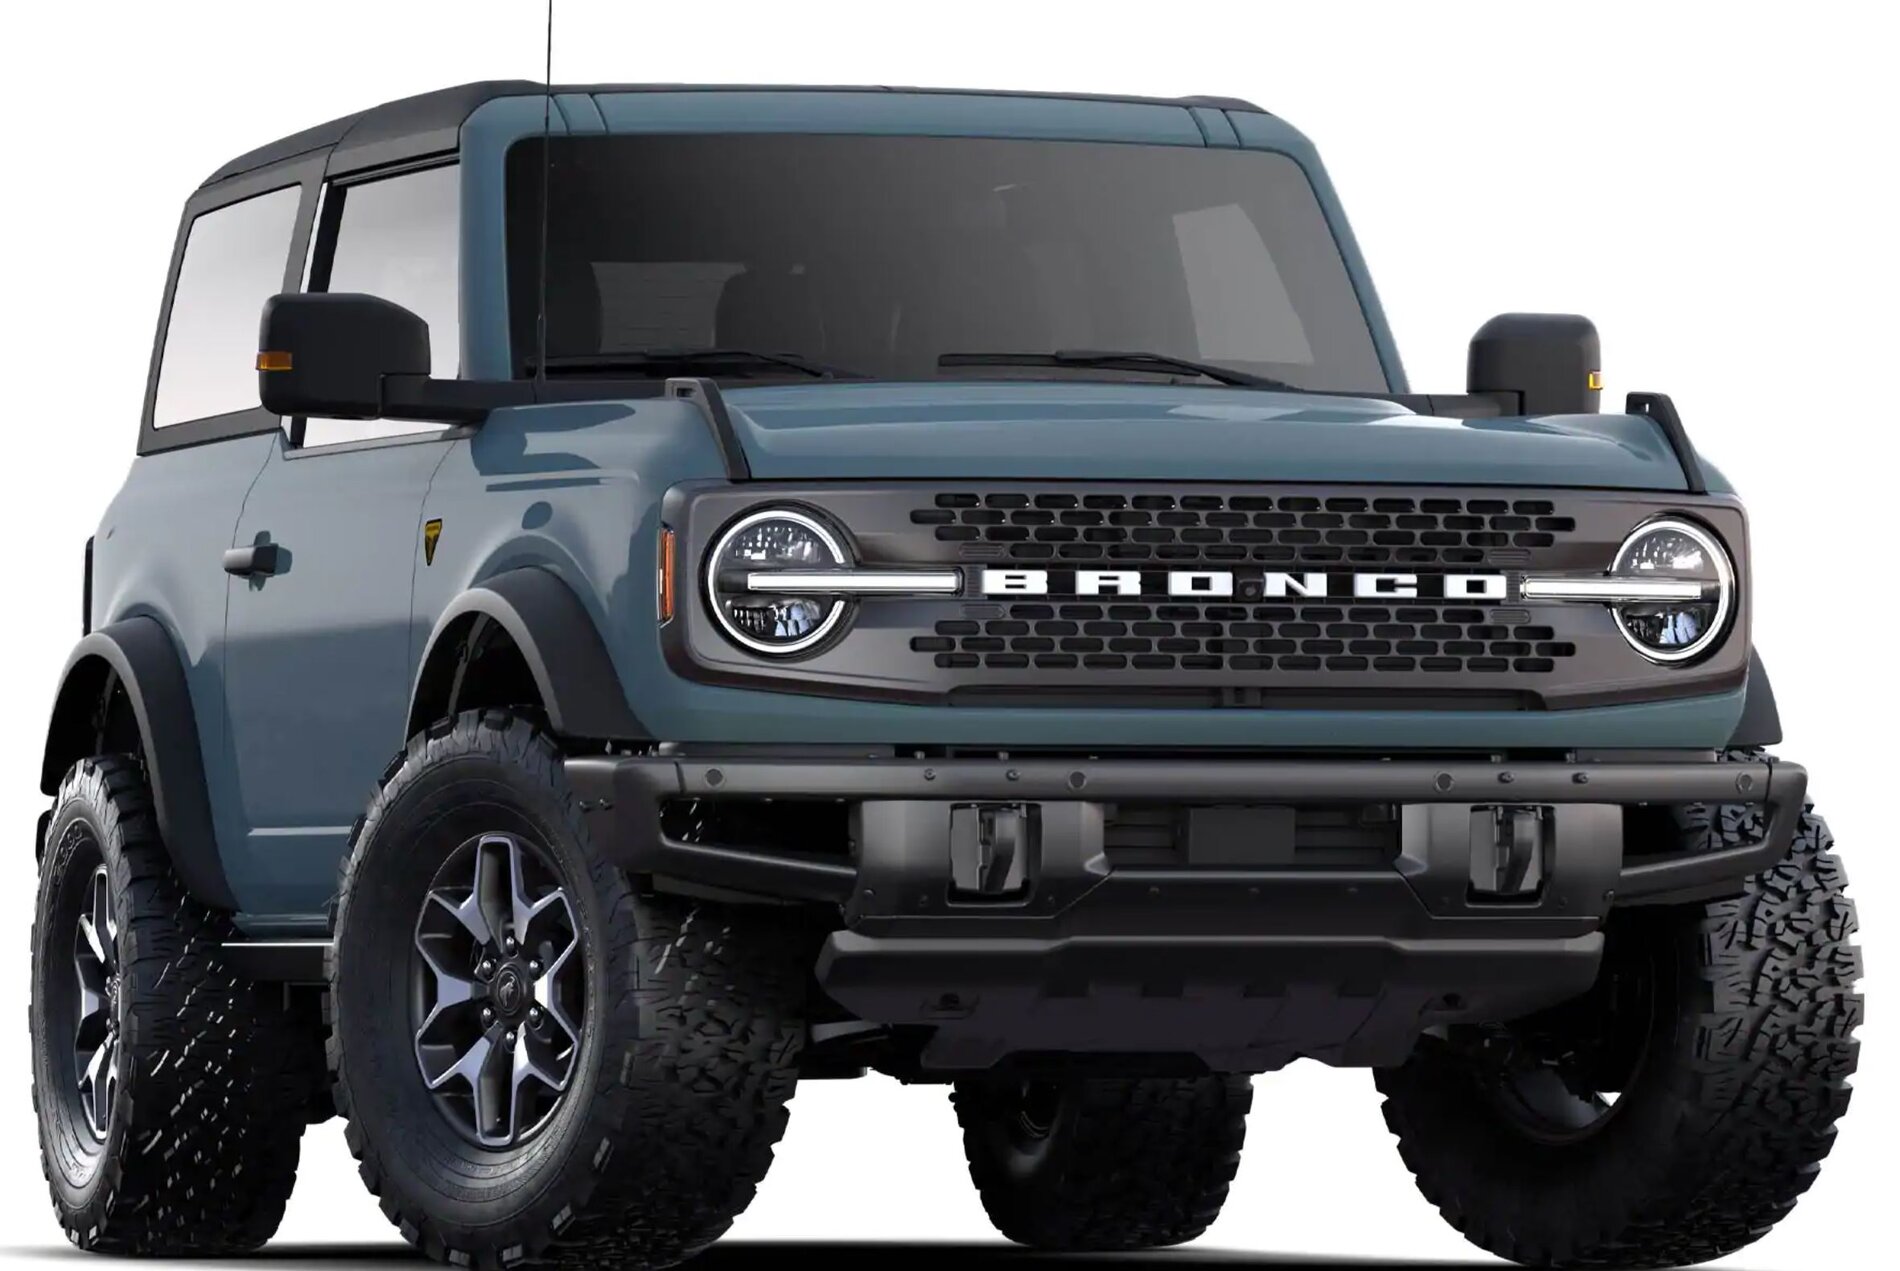 Ford Bronco Bronco6G Live Reveal Viewing Party (With Giveaways)! ? badlands.JPG